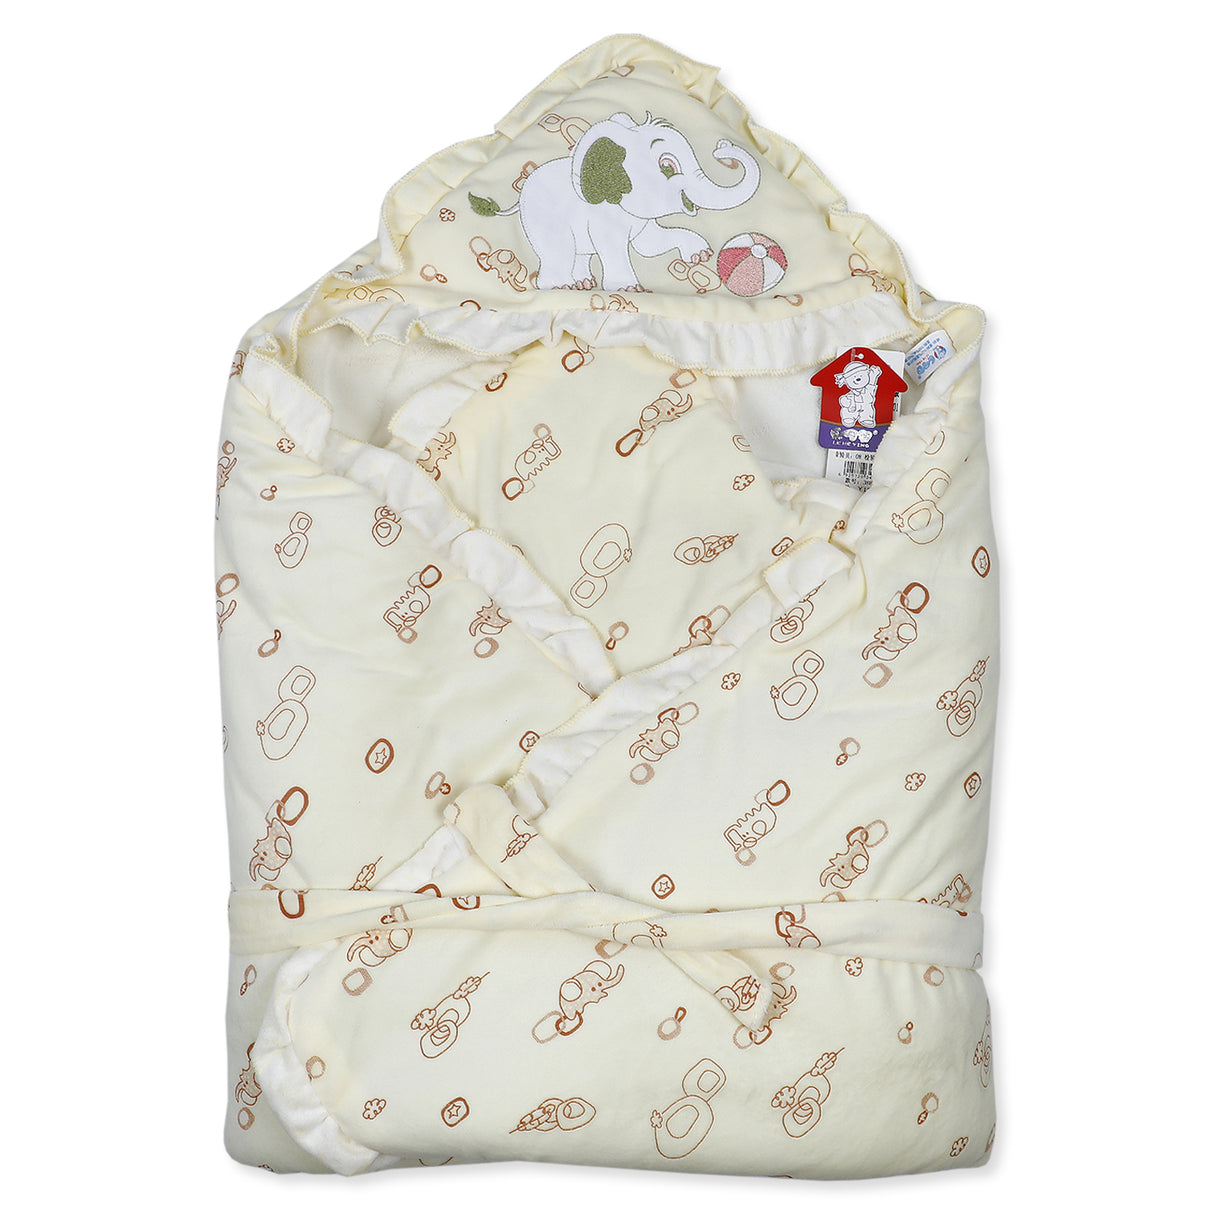 Baby Elephant Soft Adorable Cotton Baby Wrapper